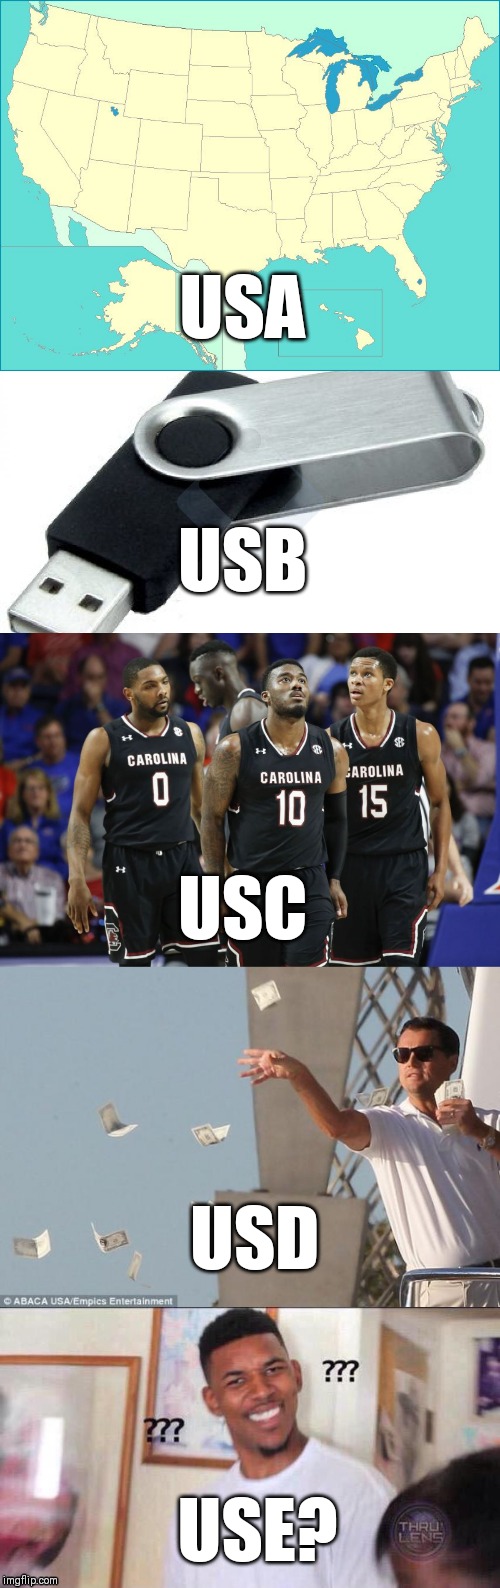 Is IT useful? | USA; USB; USC; USD; USE? | image tagged in cash money,black guy confused,usa map,usbpersa,final 4 usc | made w/ Imgflip meme maker